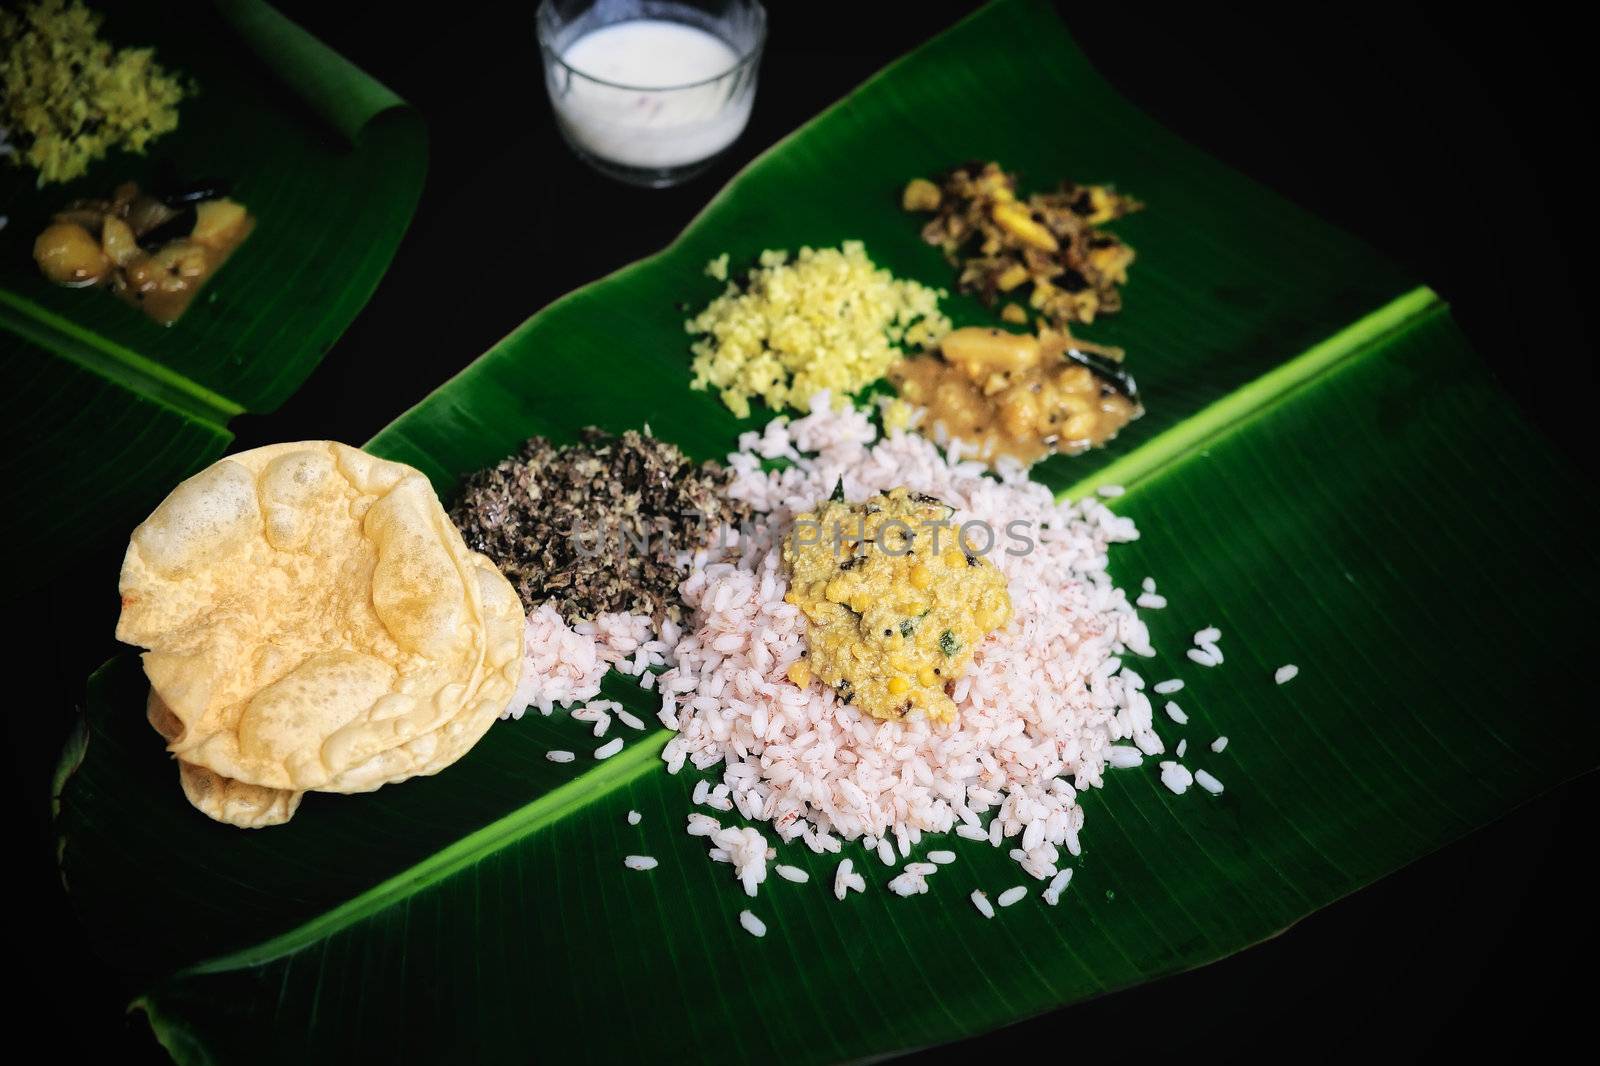 Indian breakfast is served on a sheet palm